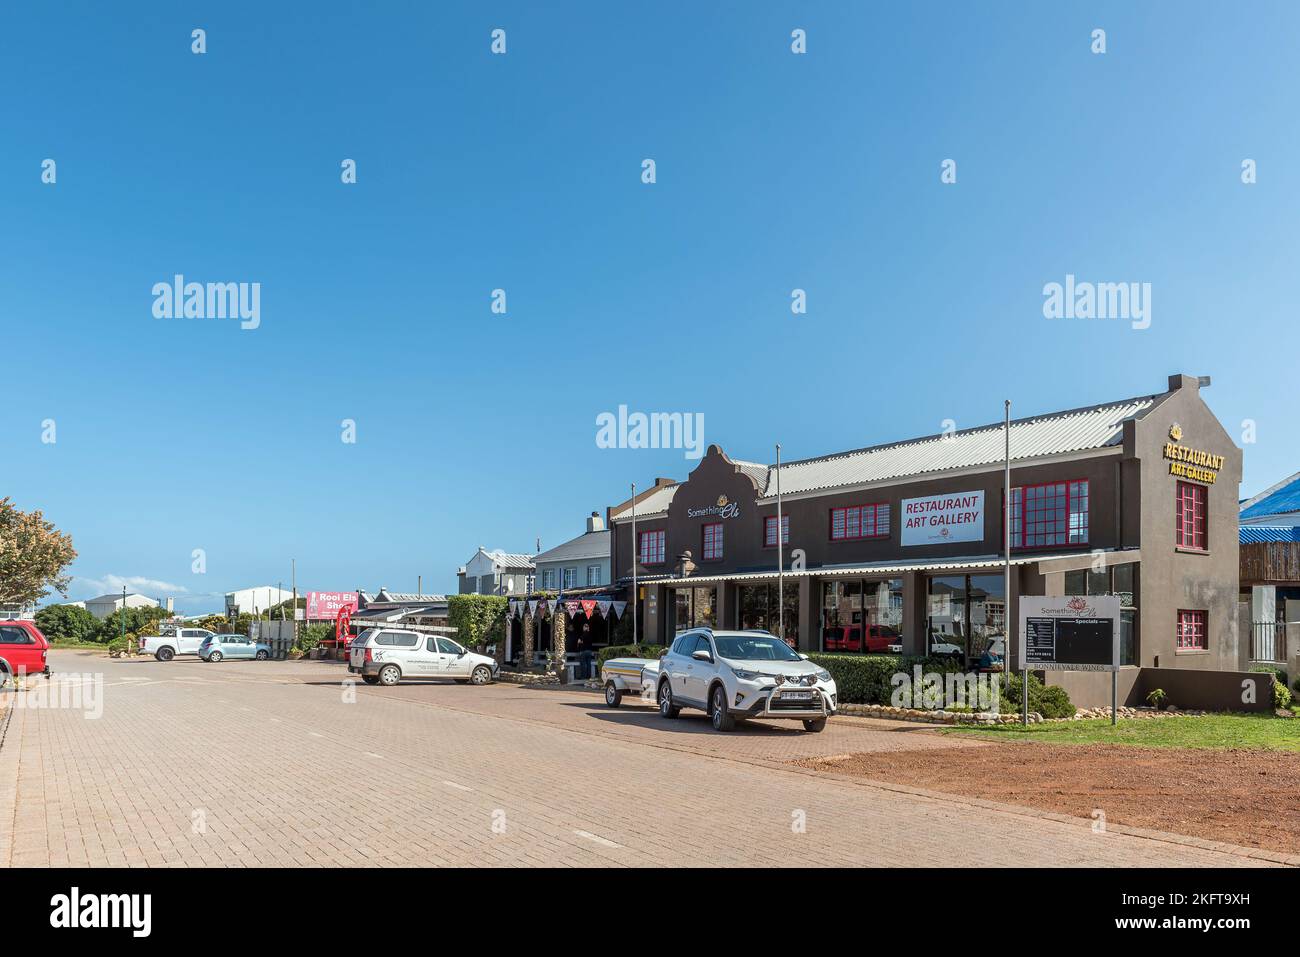 Rooiels, South Africa - Sep 20, 2022: A street scene in Rooiels in the Western Cape Overberg Region. A restaurant, art gallery and vehicles are visibl Stock Photo